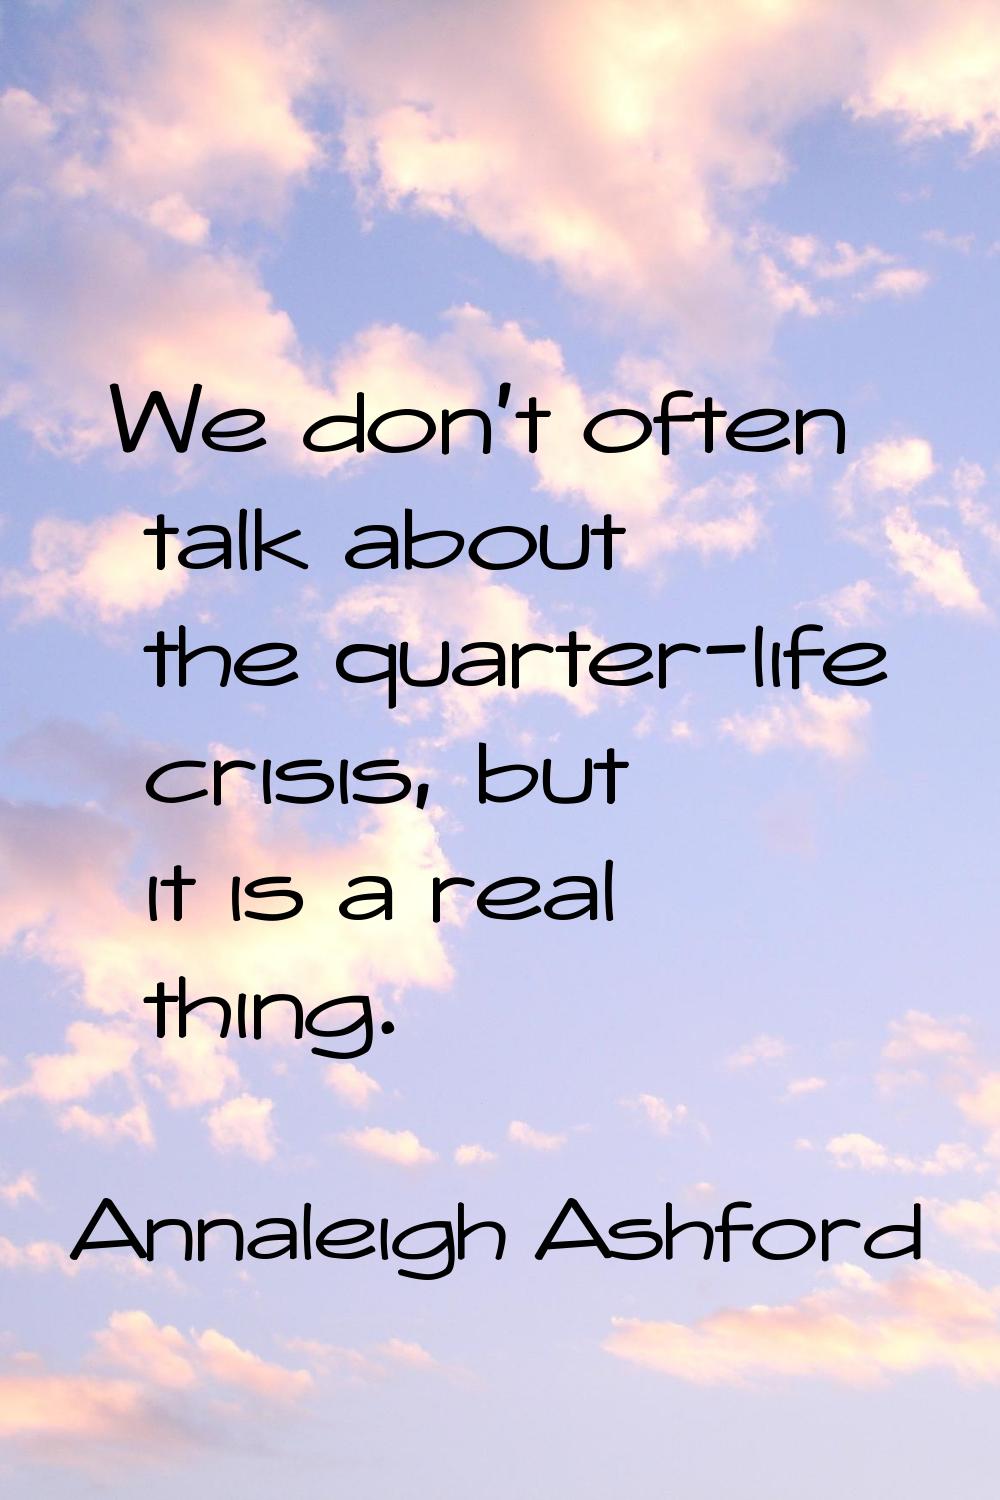 We don't often talk about the quarter-life crisis, but it is a real thing.